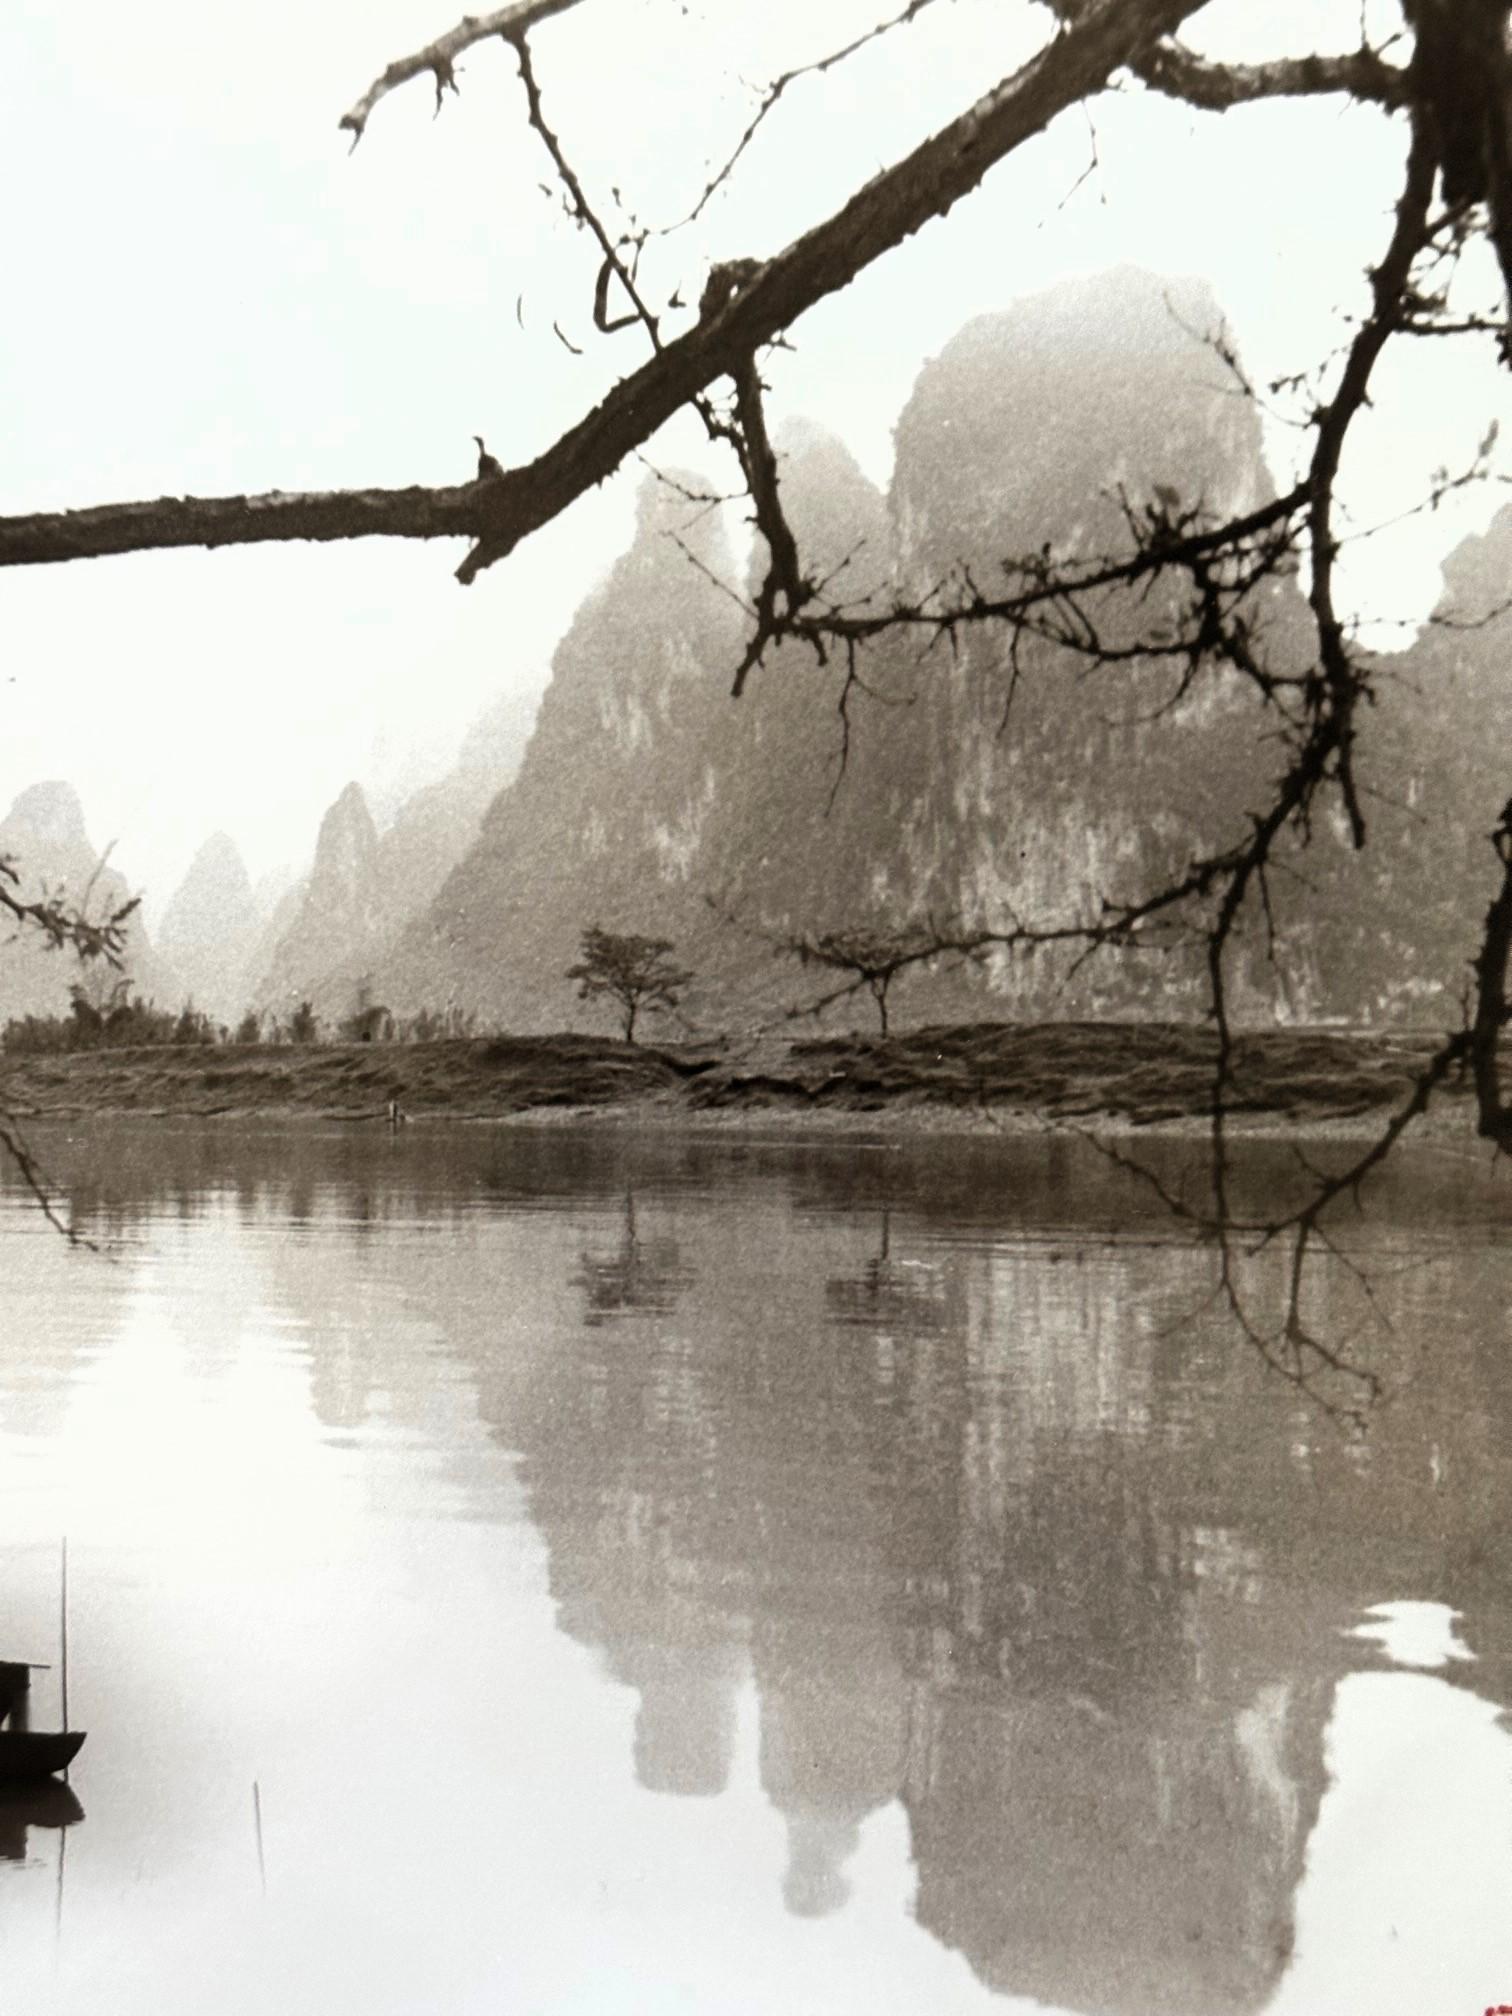 Framed Landscape Photograph by Don Hong Oai In Good Condition For Sale In Atlanta, GA